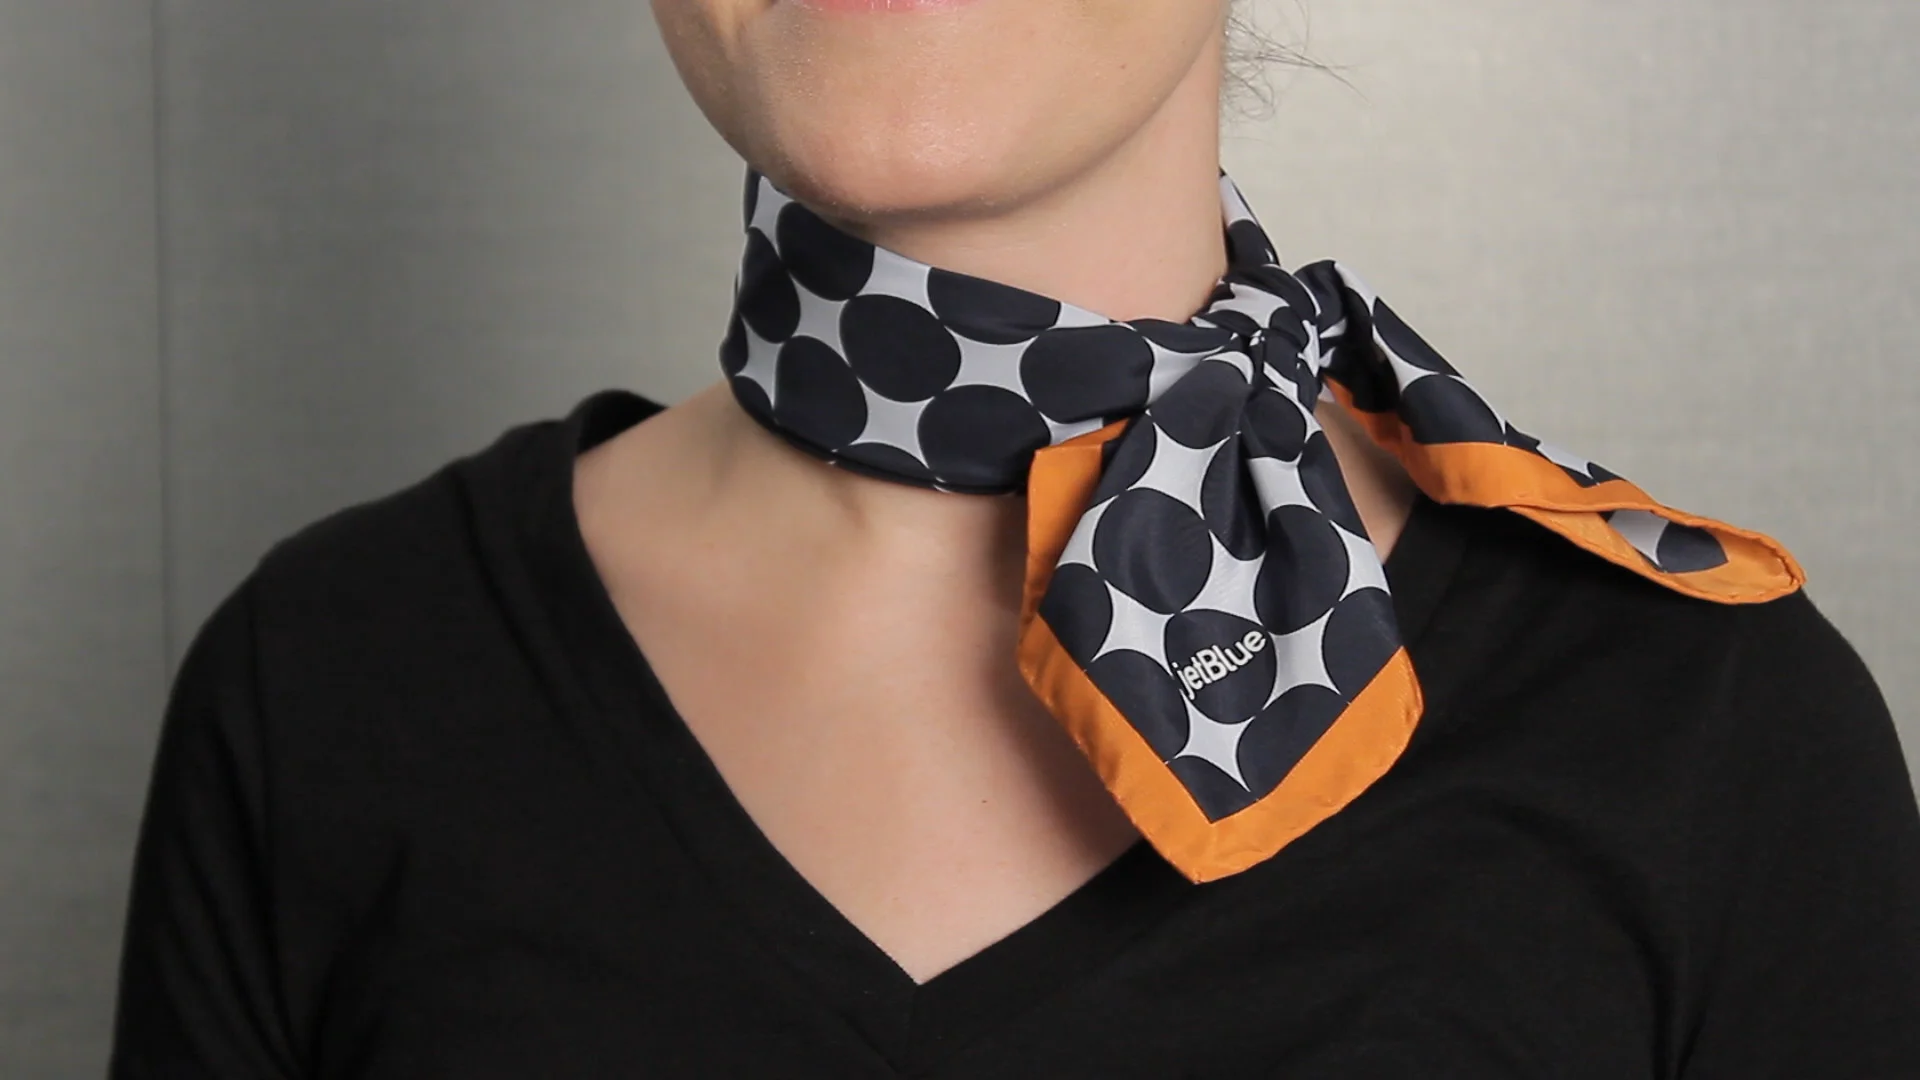 DEMO: How to tie a necktie and women's scarf 